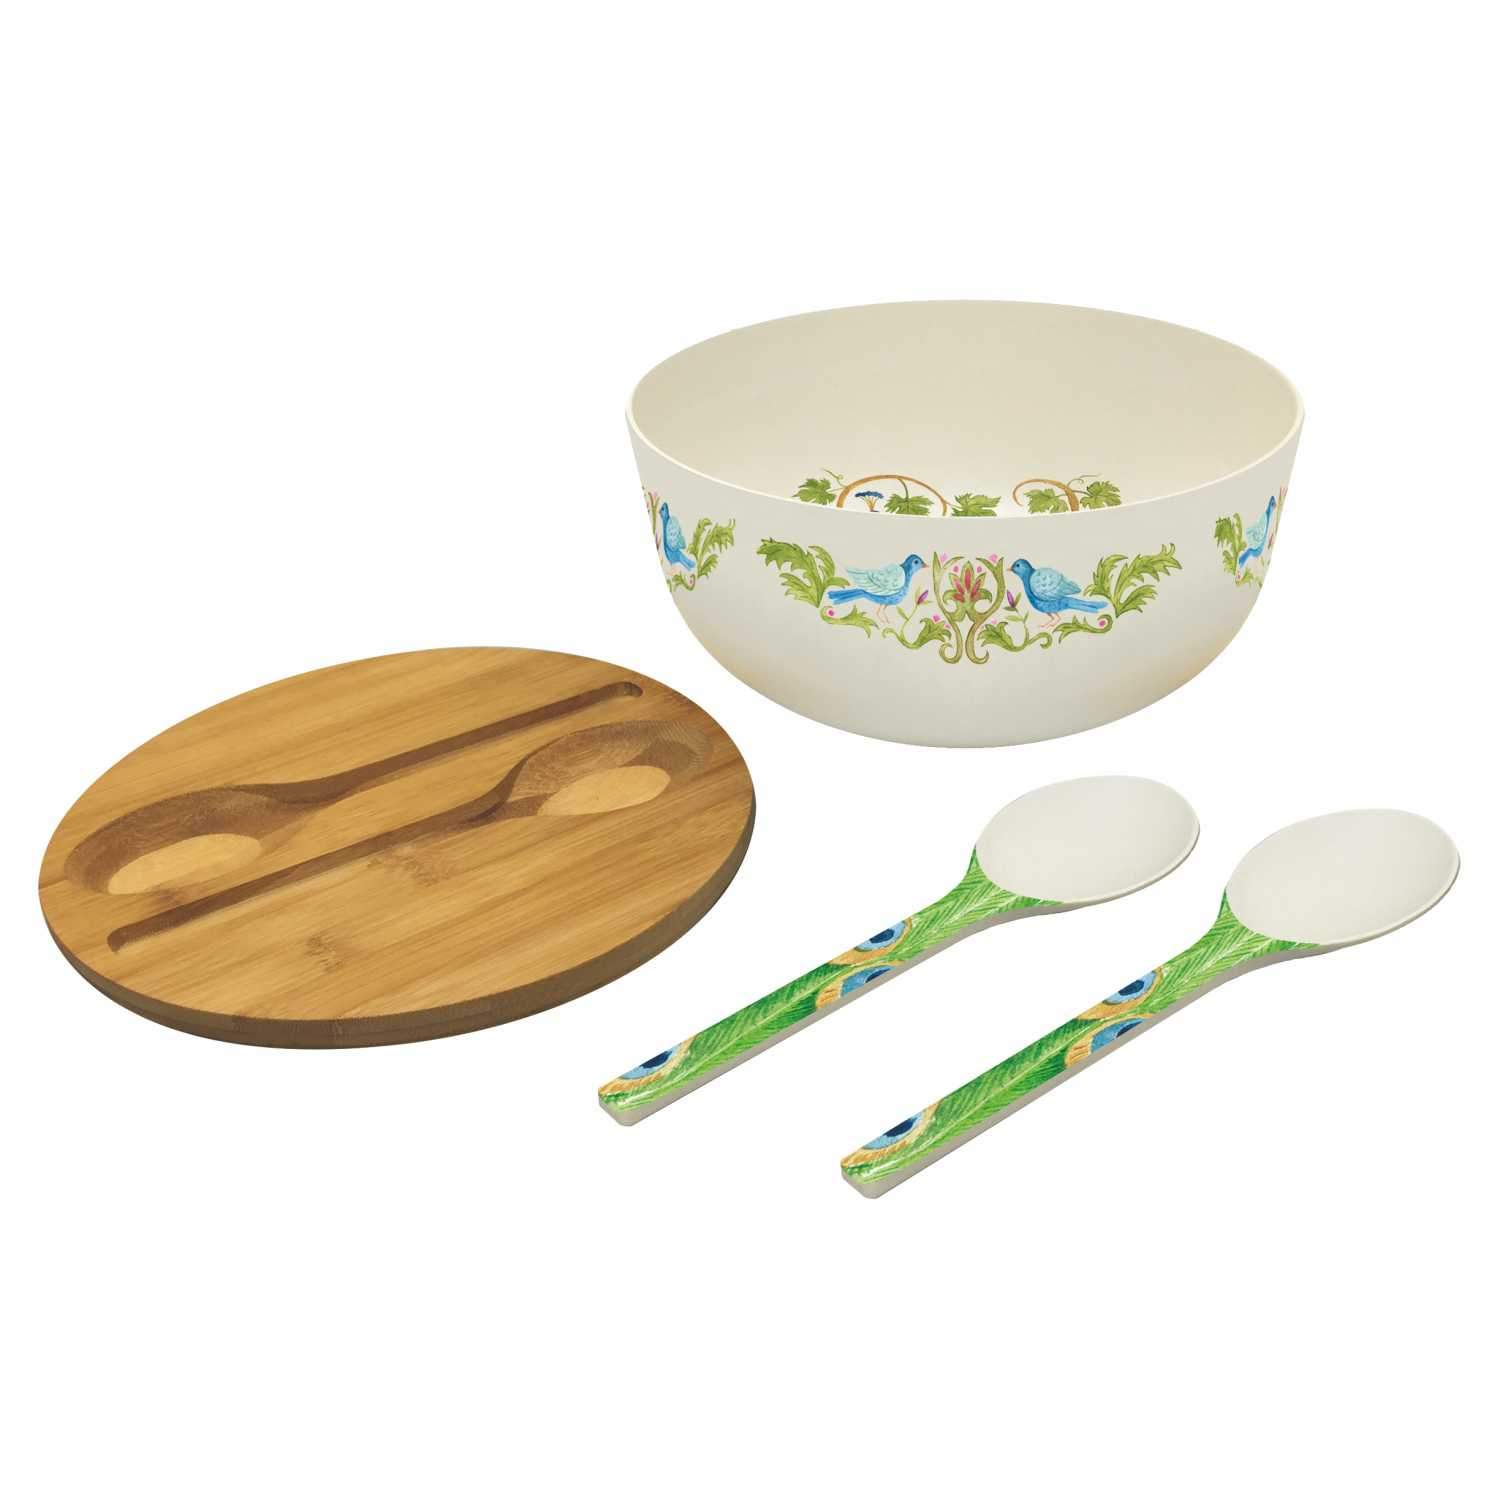 Arkitechen Salad Bowl With Accessories - Bamboo- Shop Now!